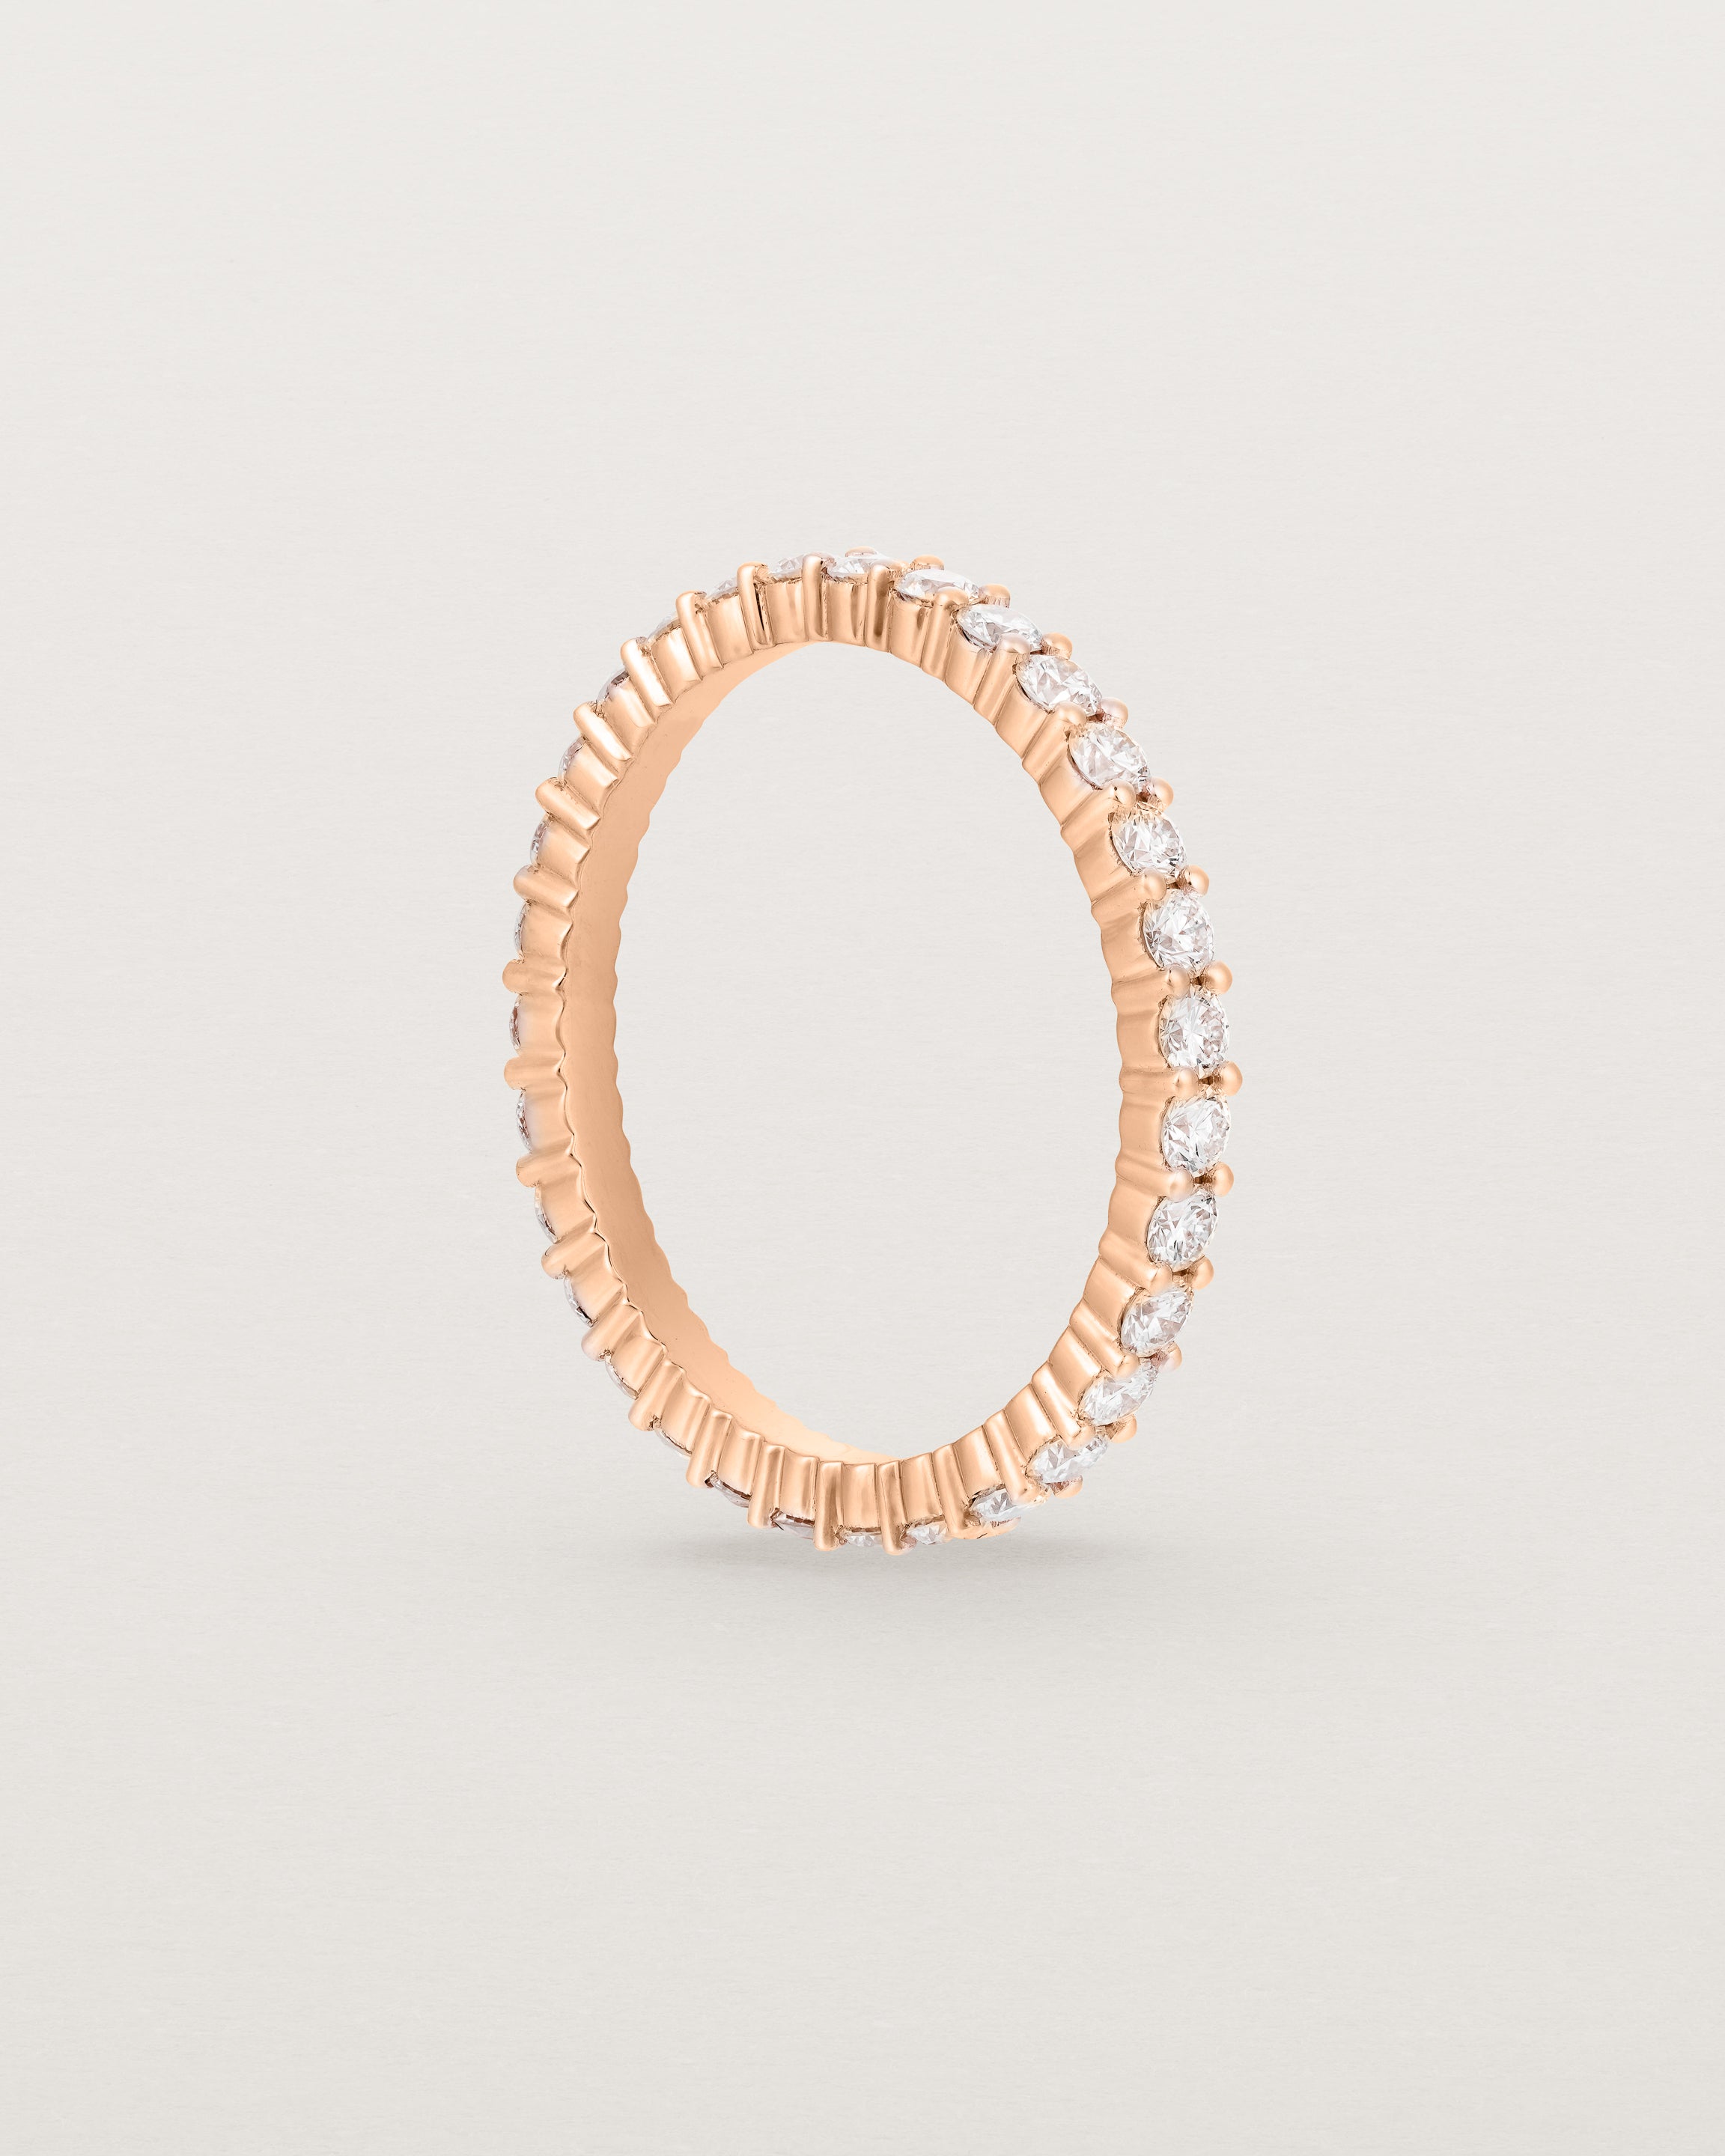 Standing view of the Grace Ring | White Diamonds in Rose Gold.